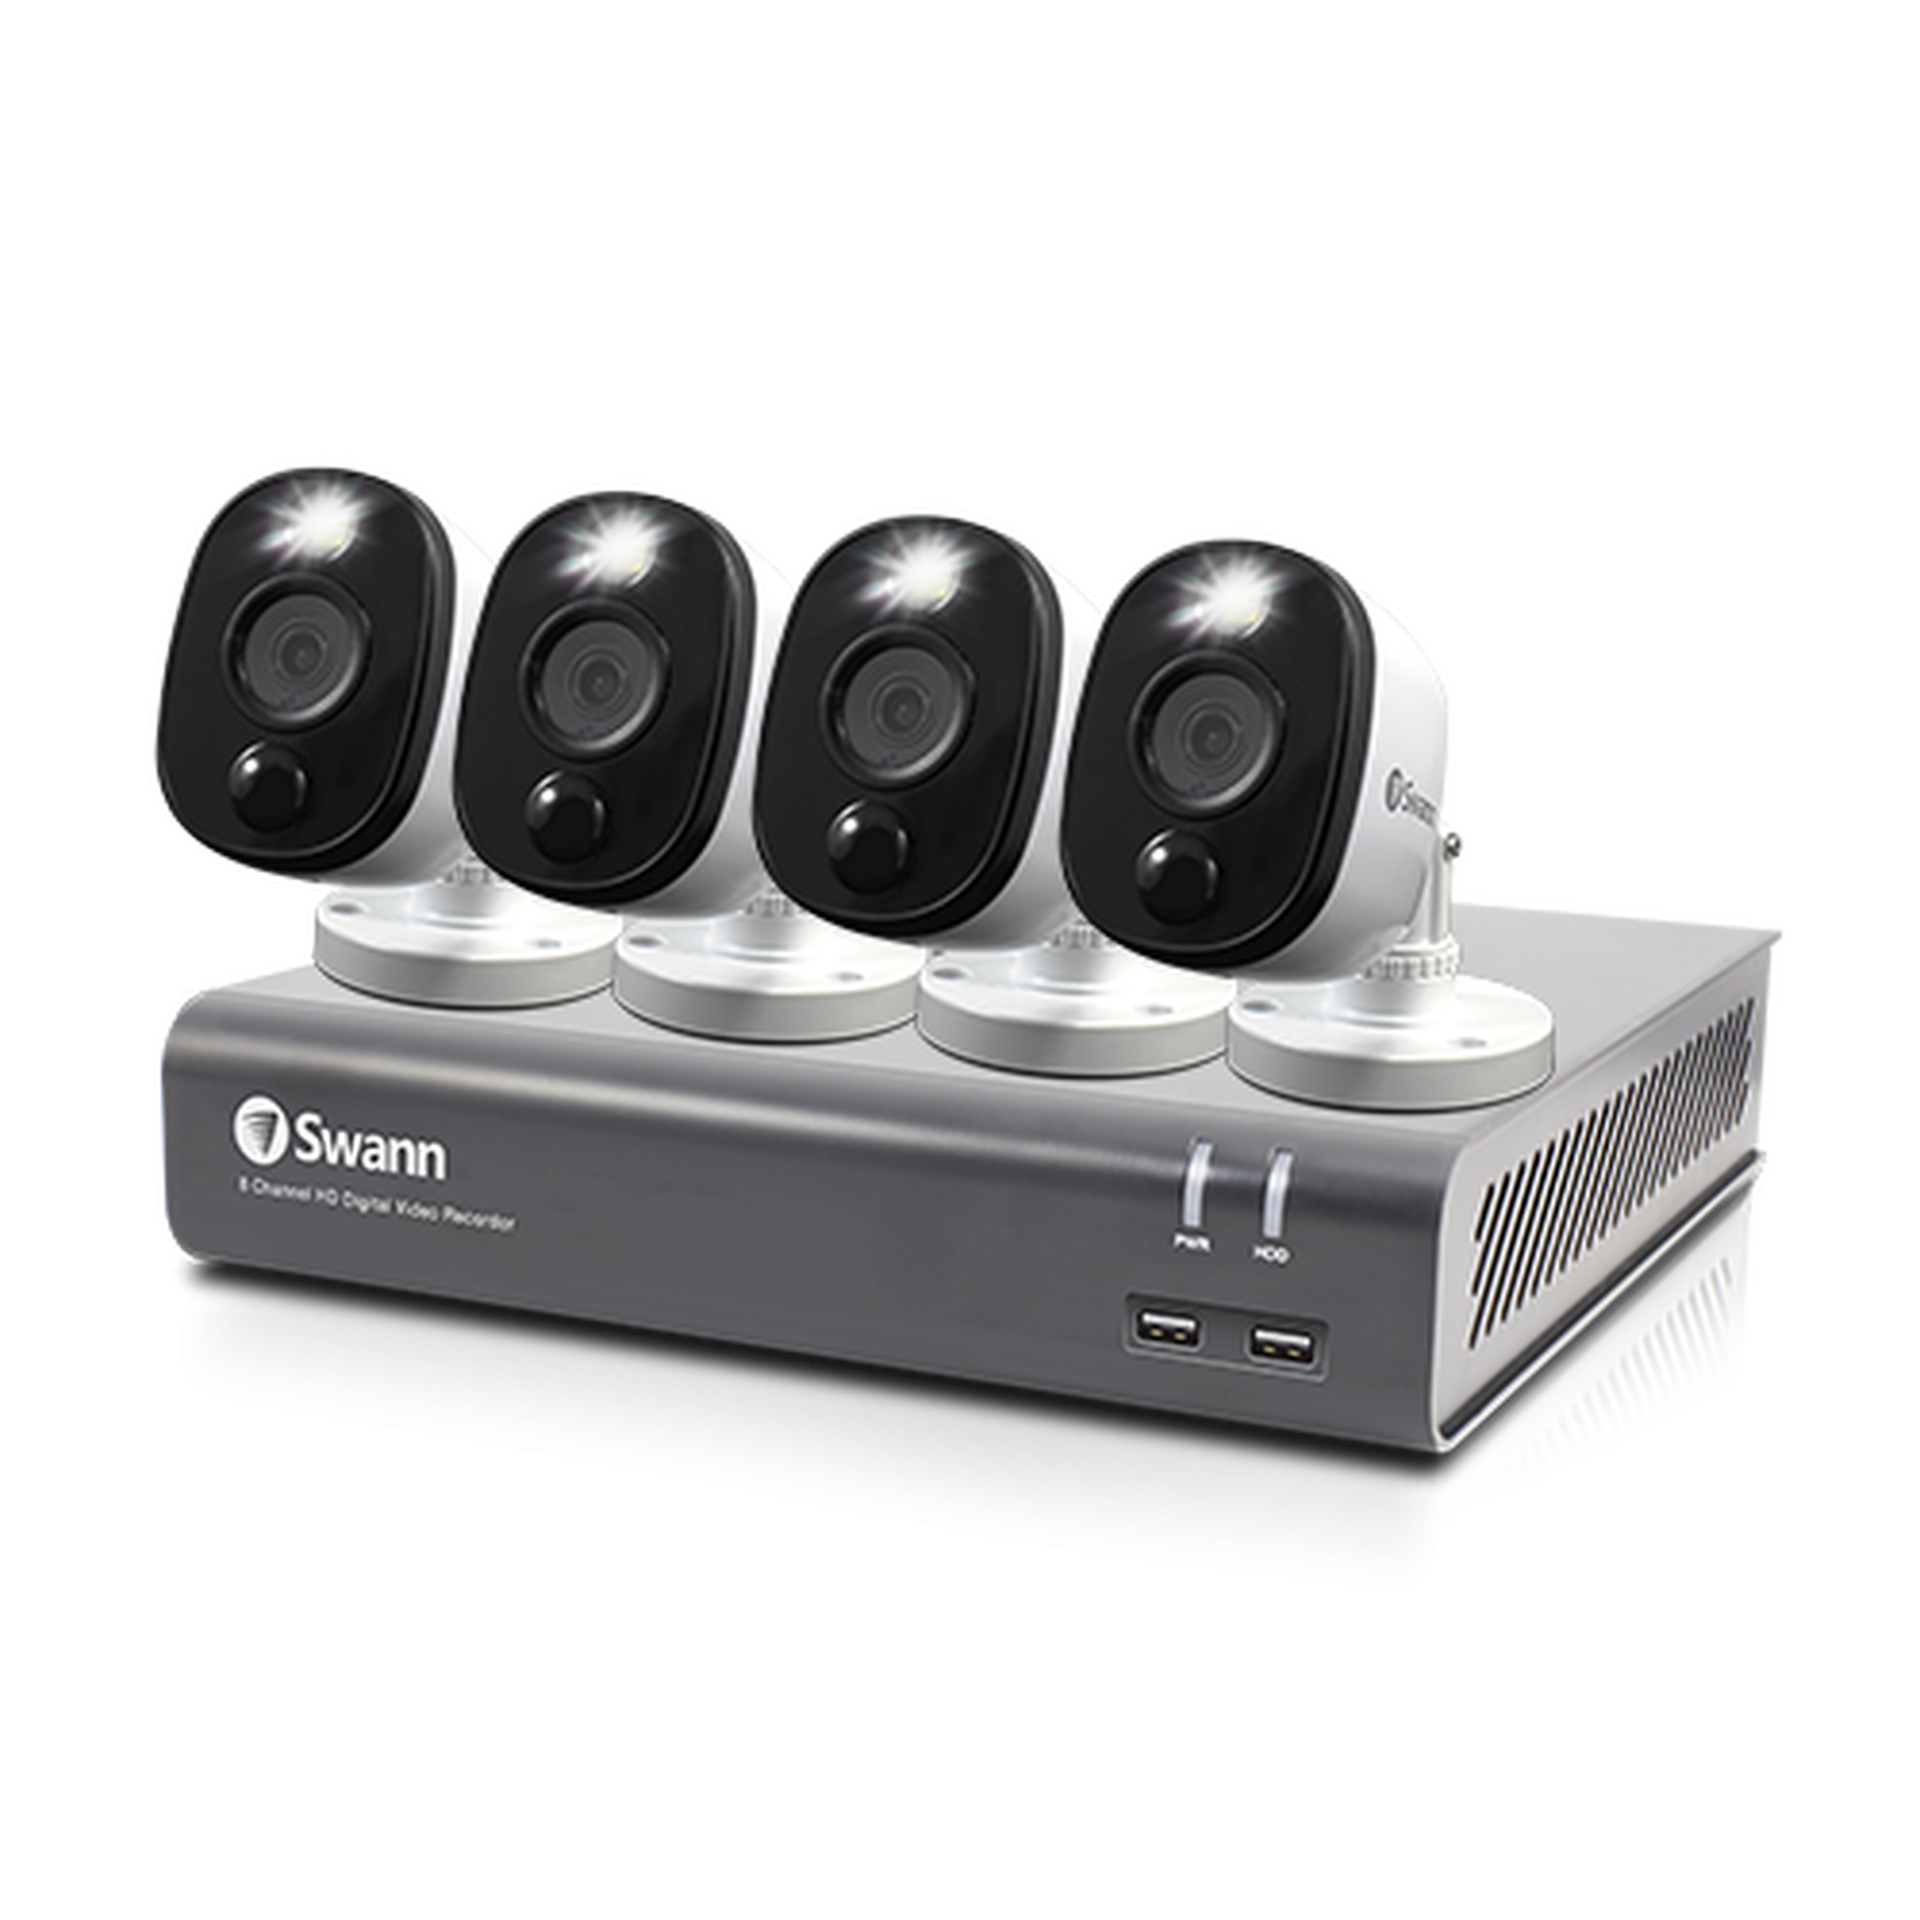 Swann 4 Camera 4 Channel 1080p Full HD DVR Security System